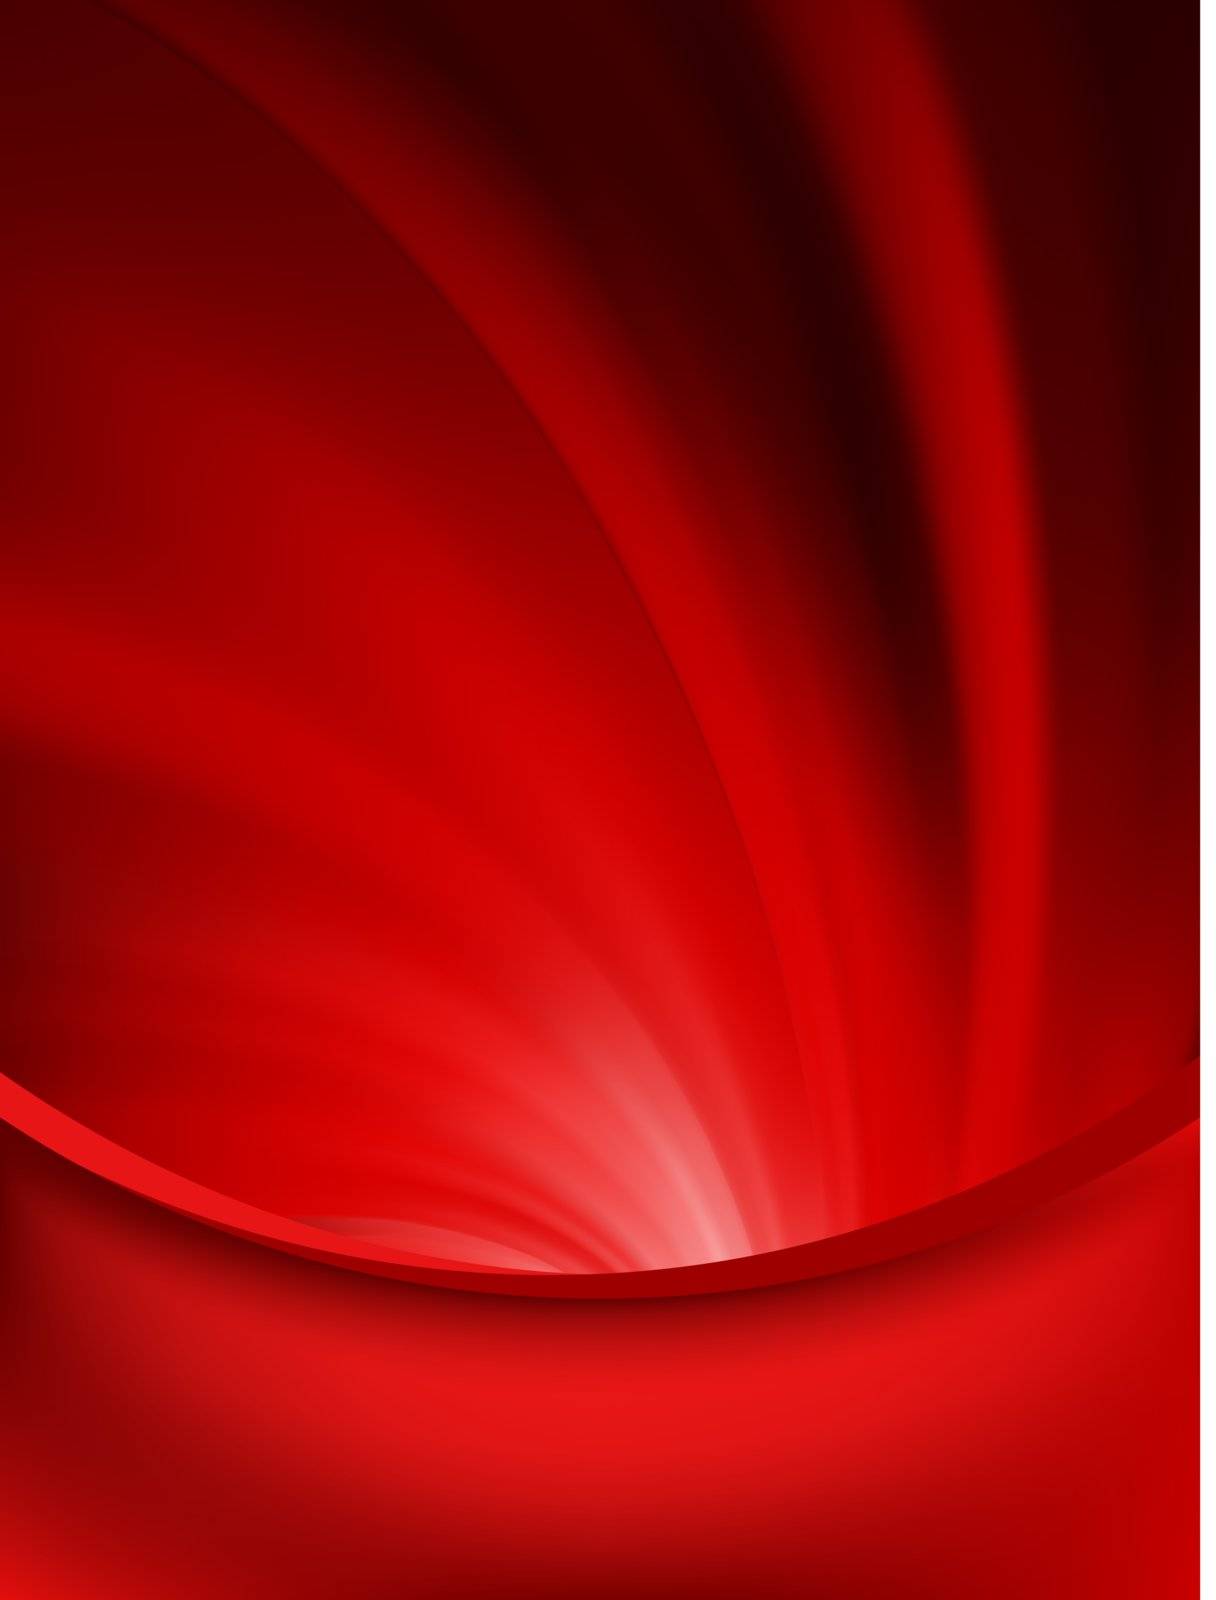 Red curtain fade to dark card. EPS 8 vector file included